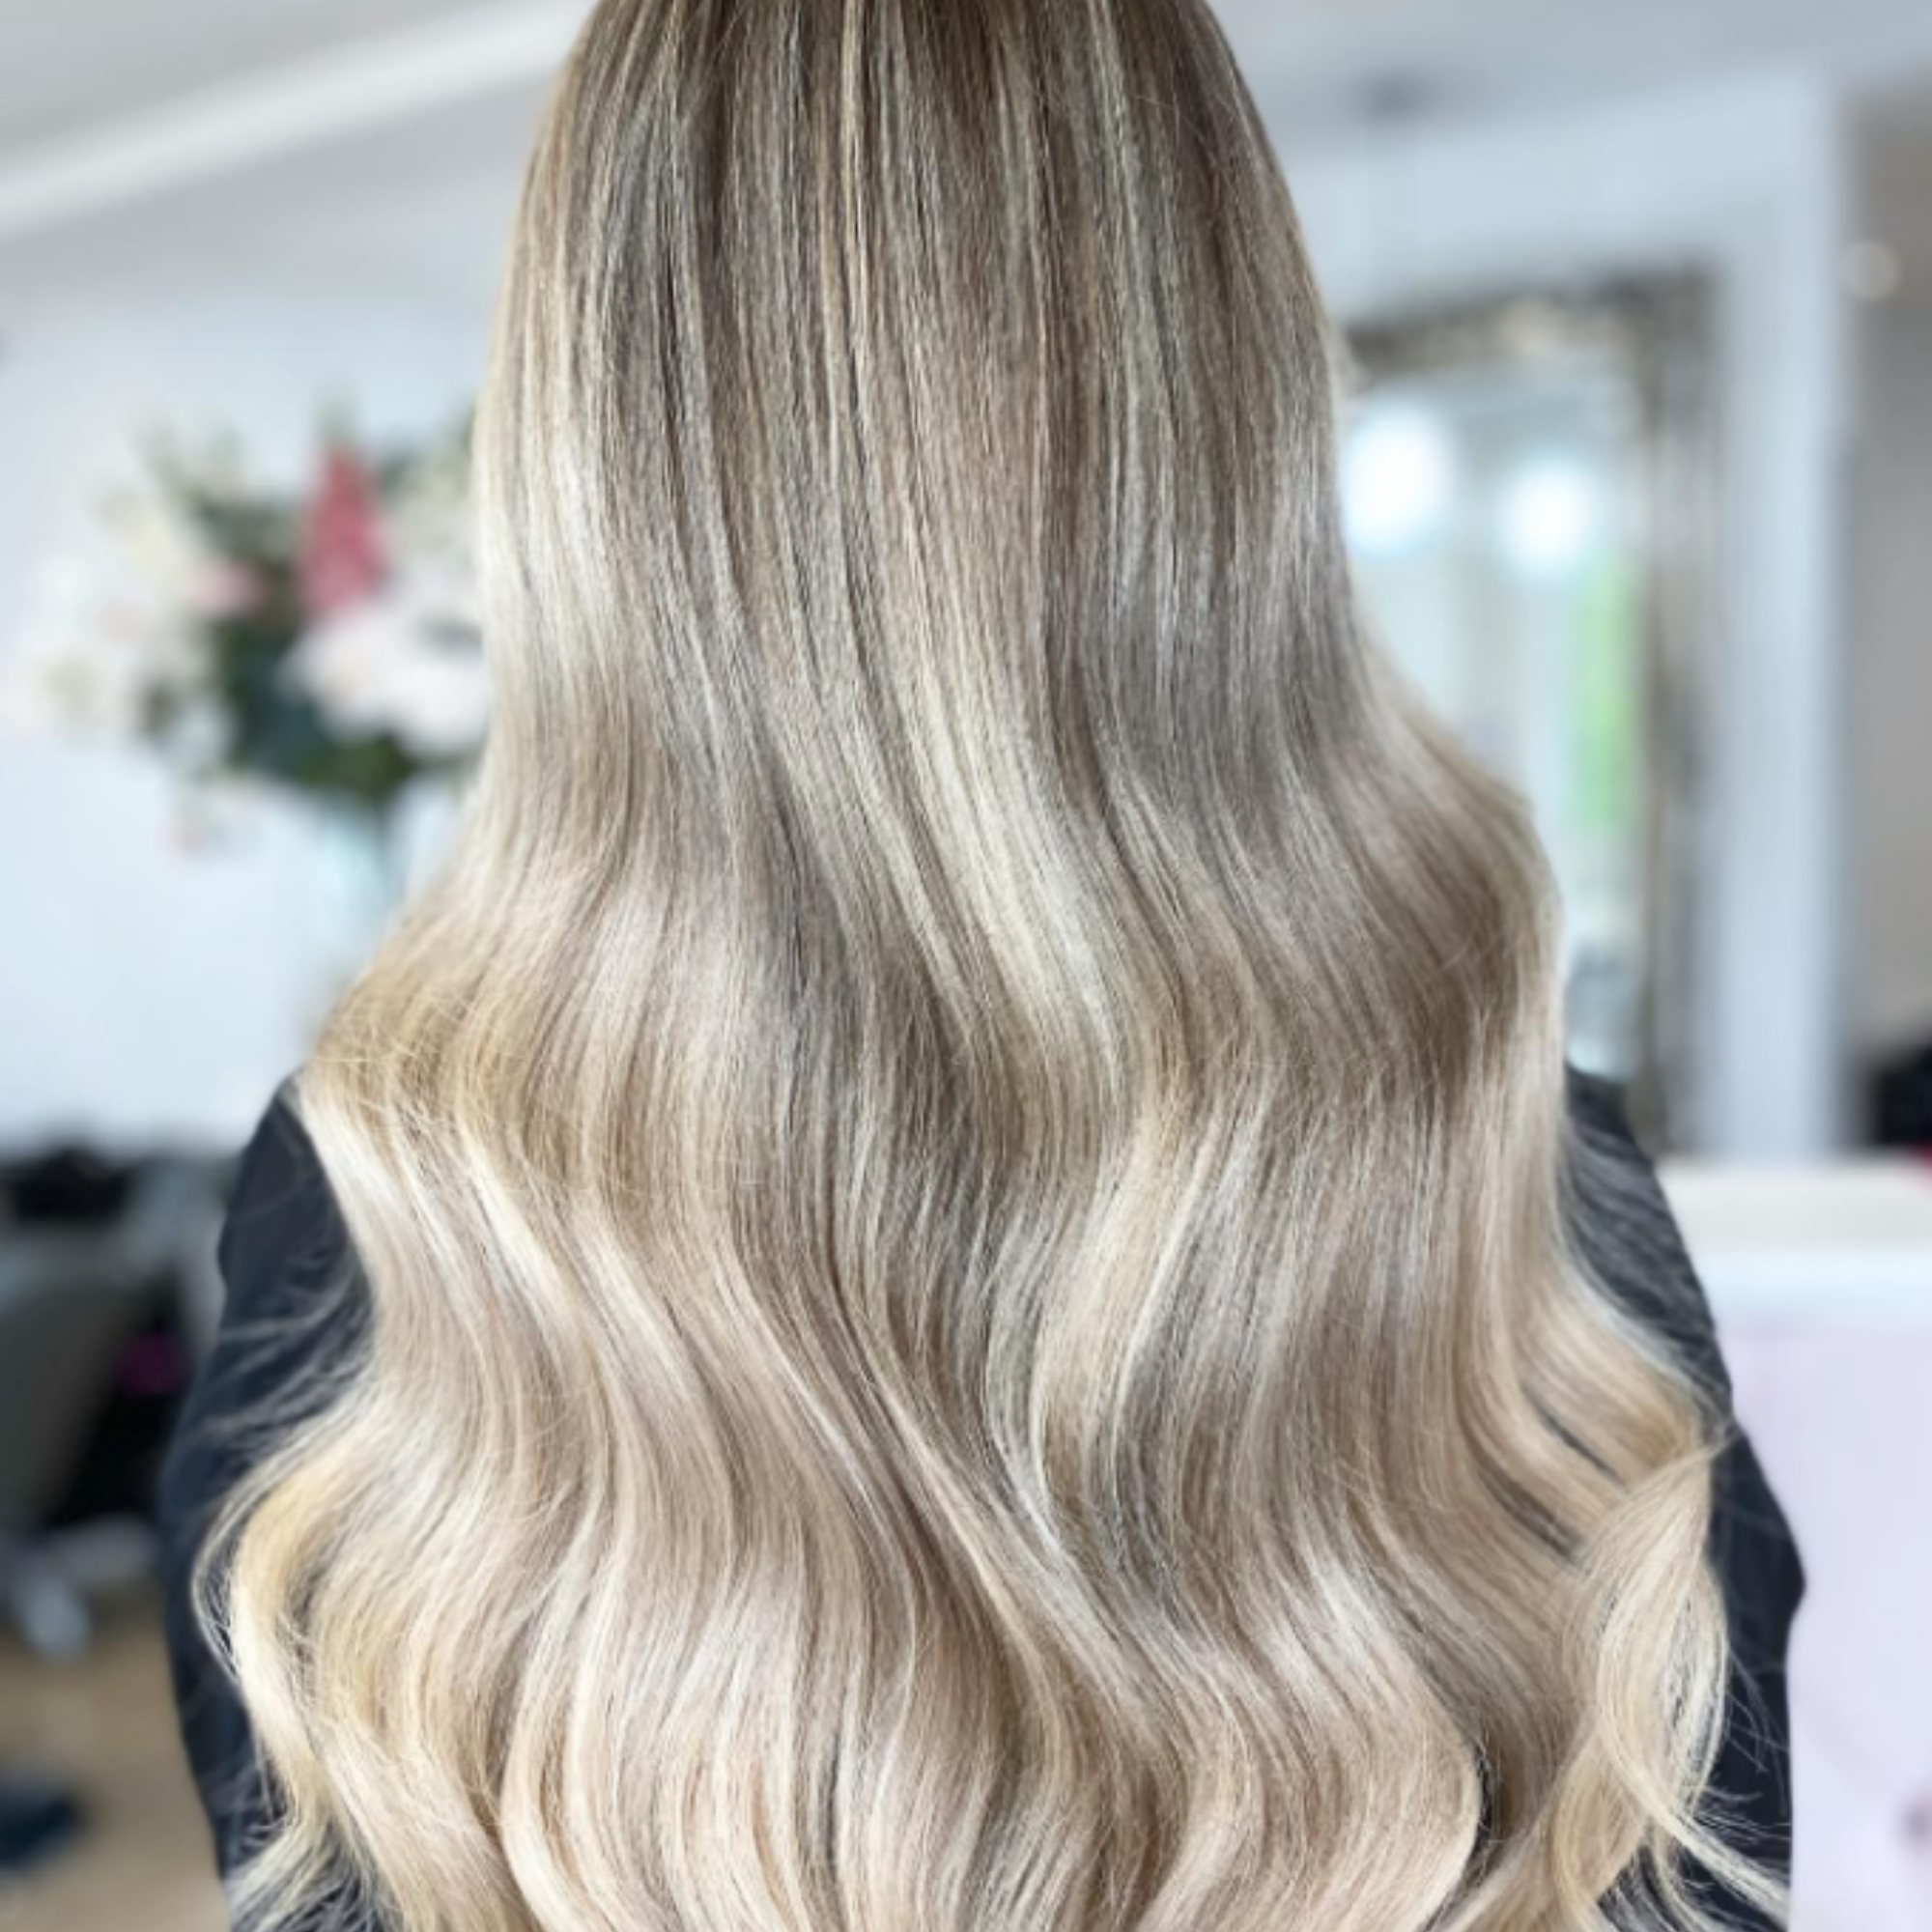 "hair rehab london 18" weft hair extensions shade swatch titled steel blonde"